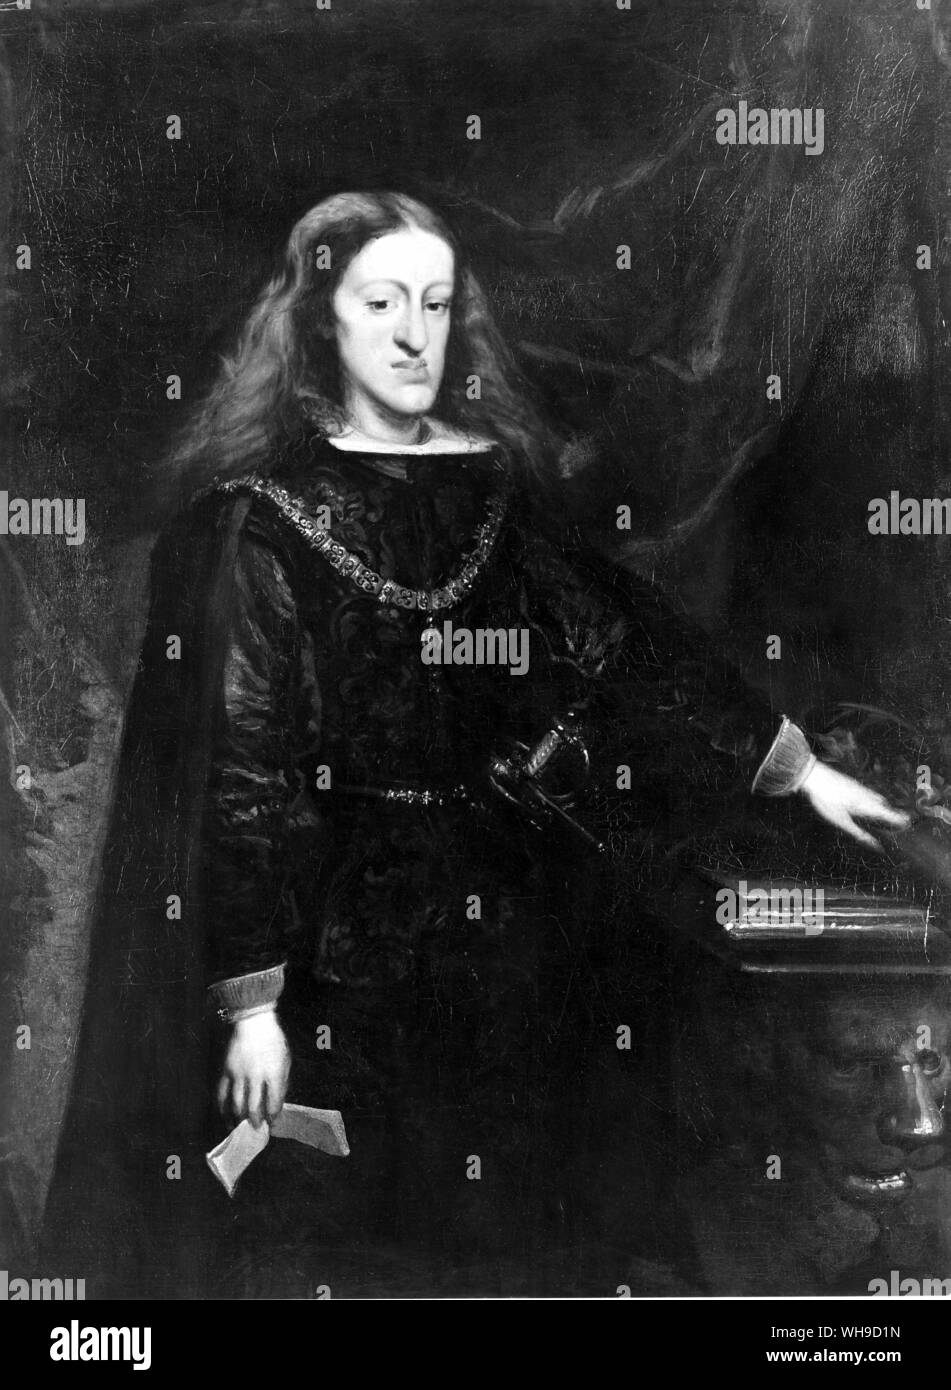 Carlos II/King Charles II of Spain (1661-1700). King from 1665. The second son of Philip IV, he was the last of the Hapsburg kings. Mentally disabled from birth, he bequeathed his dominions to Philip of Anjou, grandson of Louis XIV, which lead to the war of Spanish Succession.King Charles VIII of France (1470-1498) King from 1483, when he succeeded his father, Louis XI. Stock Photo